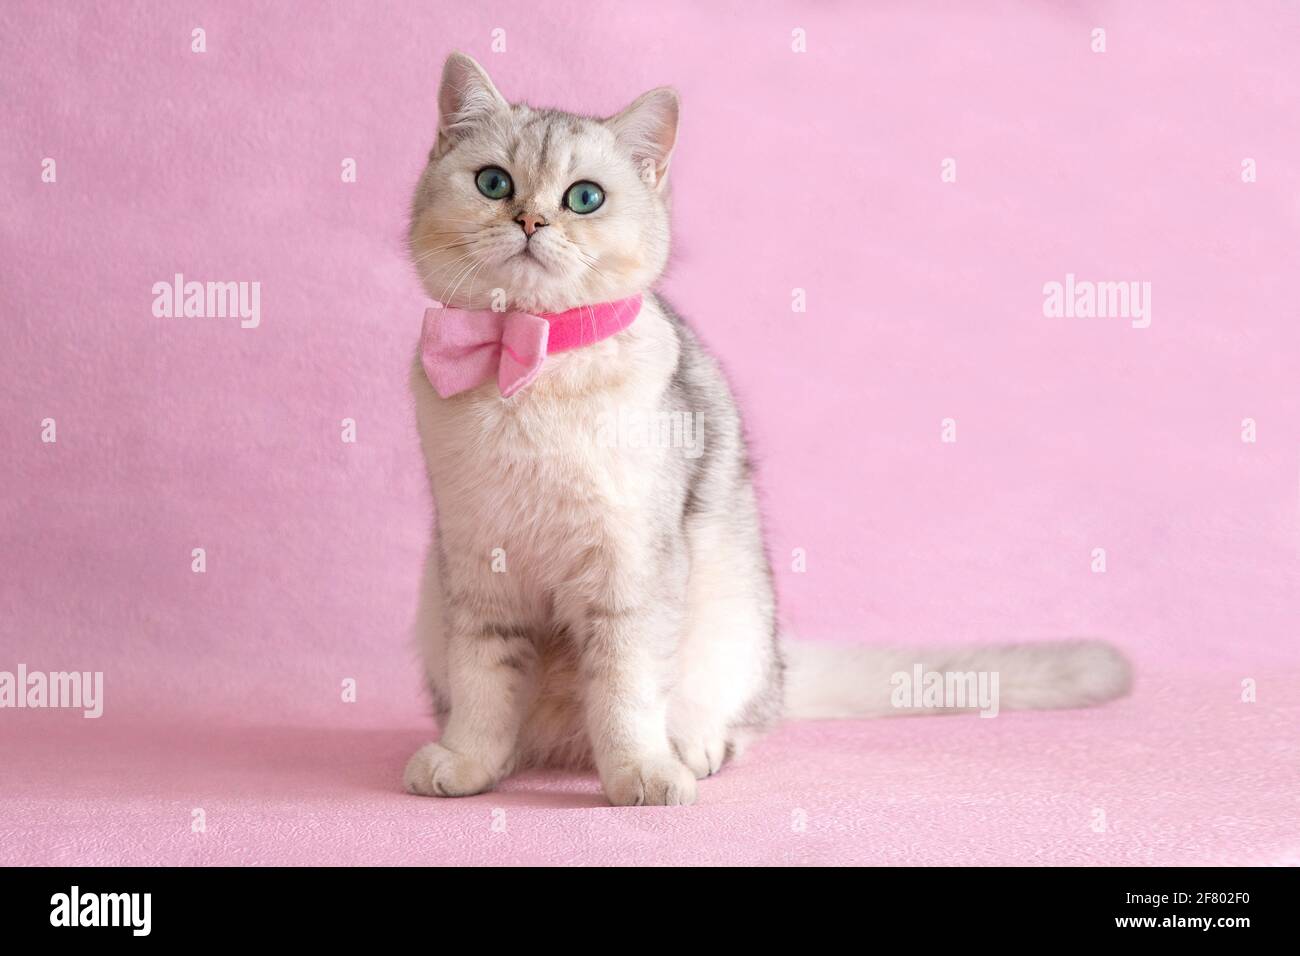 Adorable blue-eyed white british cat wearing shirt and bow tie Stock Photo